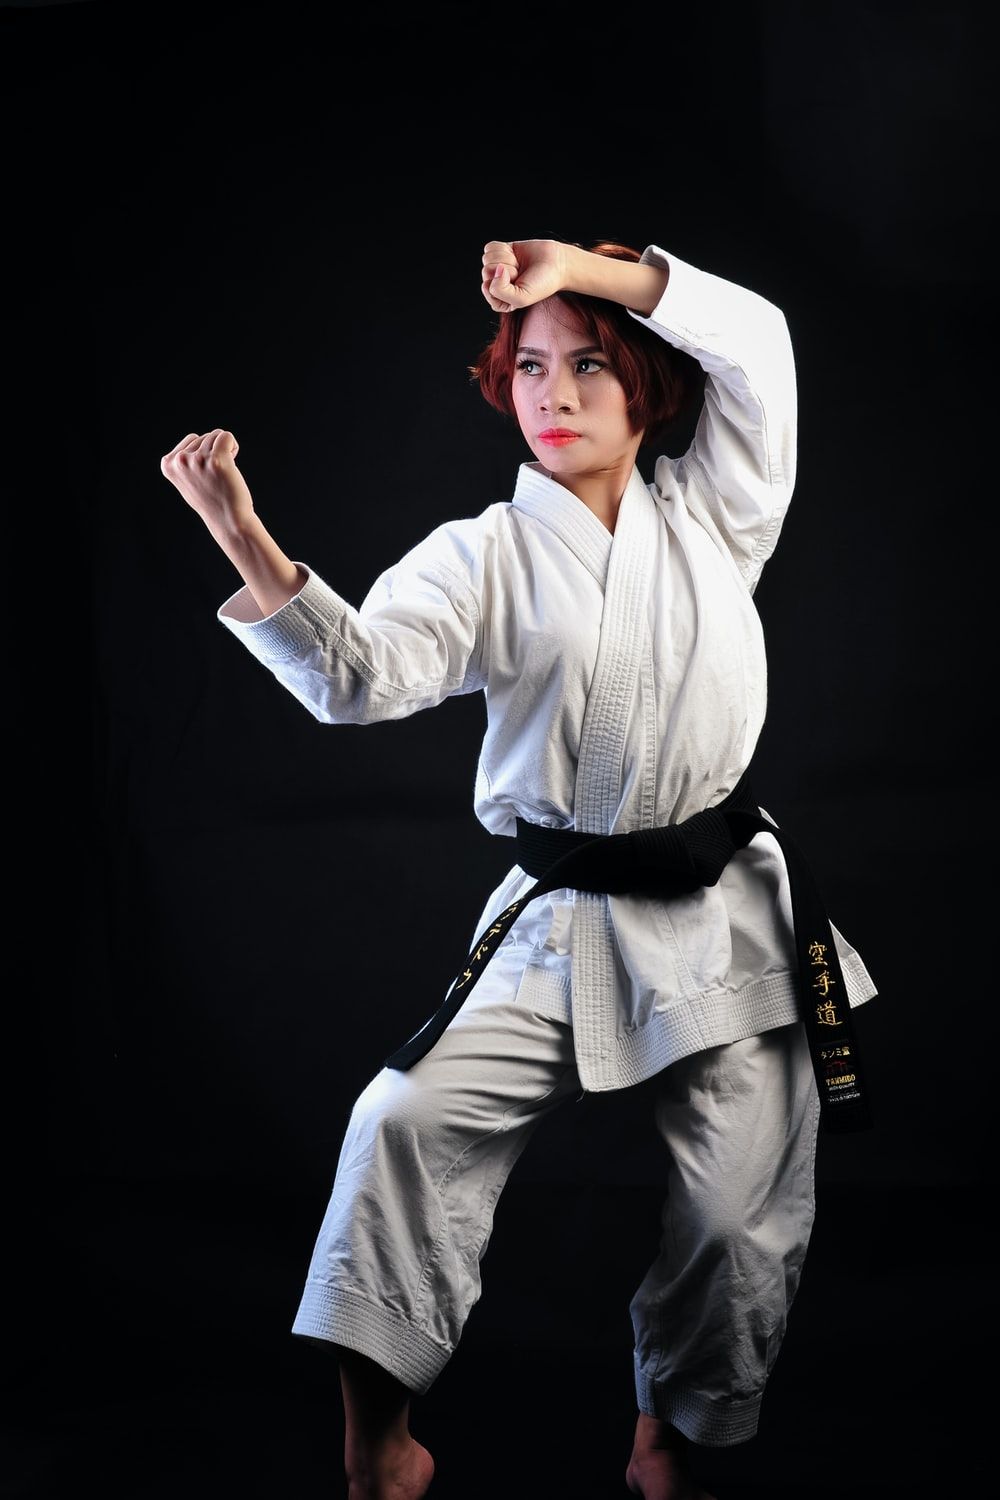 Martial Arts Picture. Download Free Image